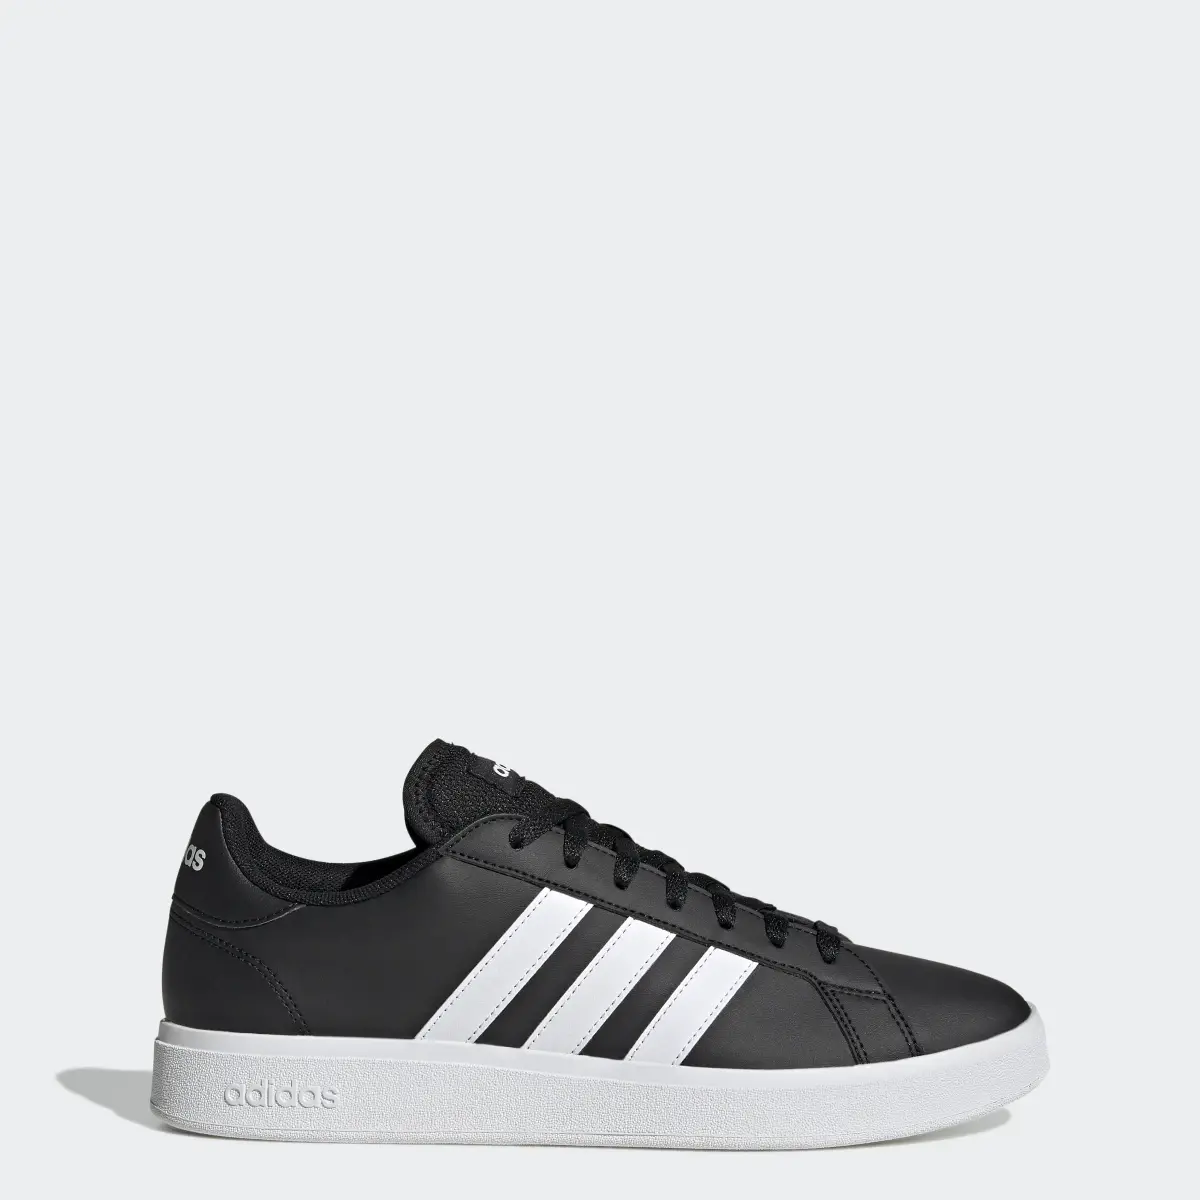 Adidas Grand Court TD Lifestyle Court Casual Shoes. 1